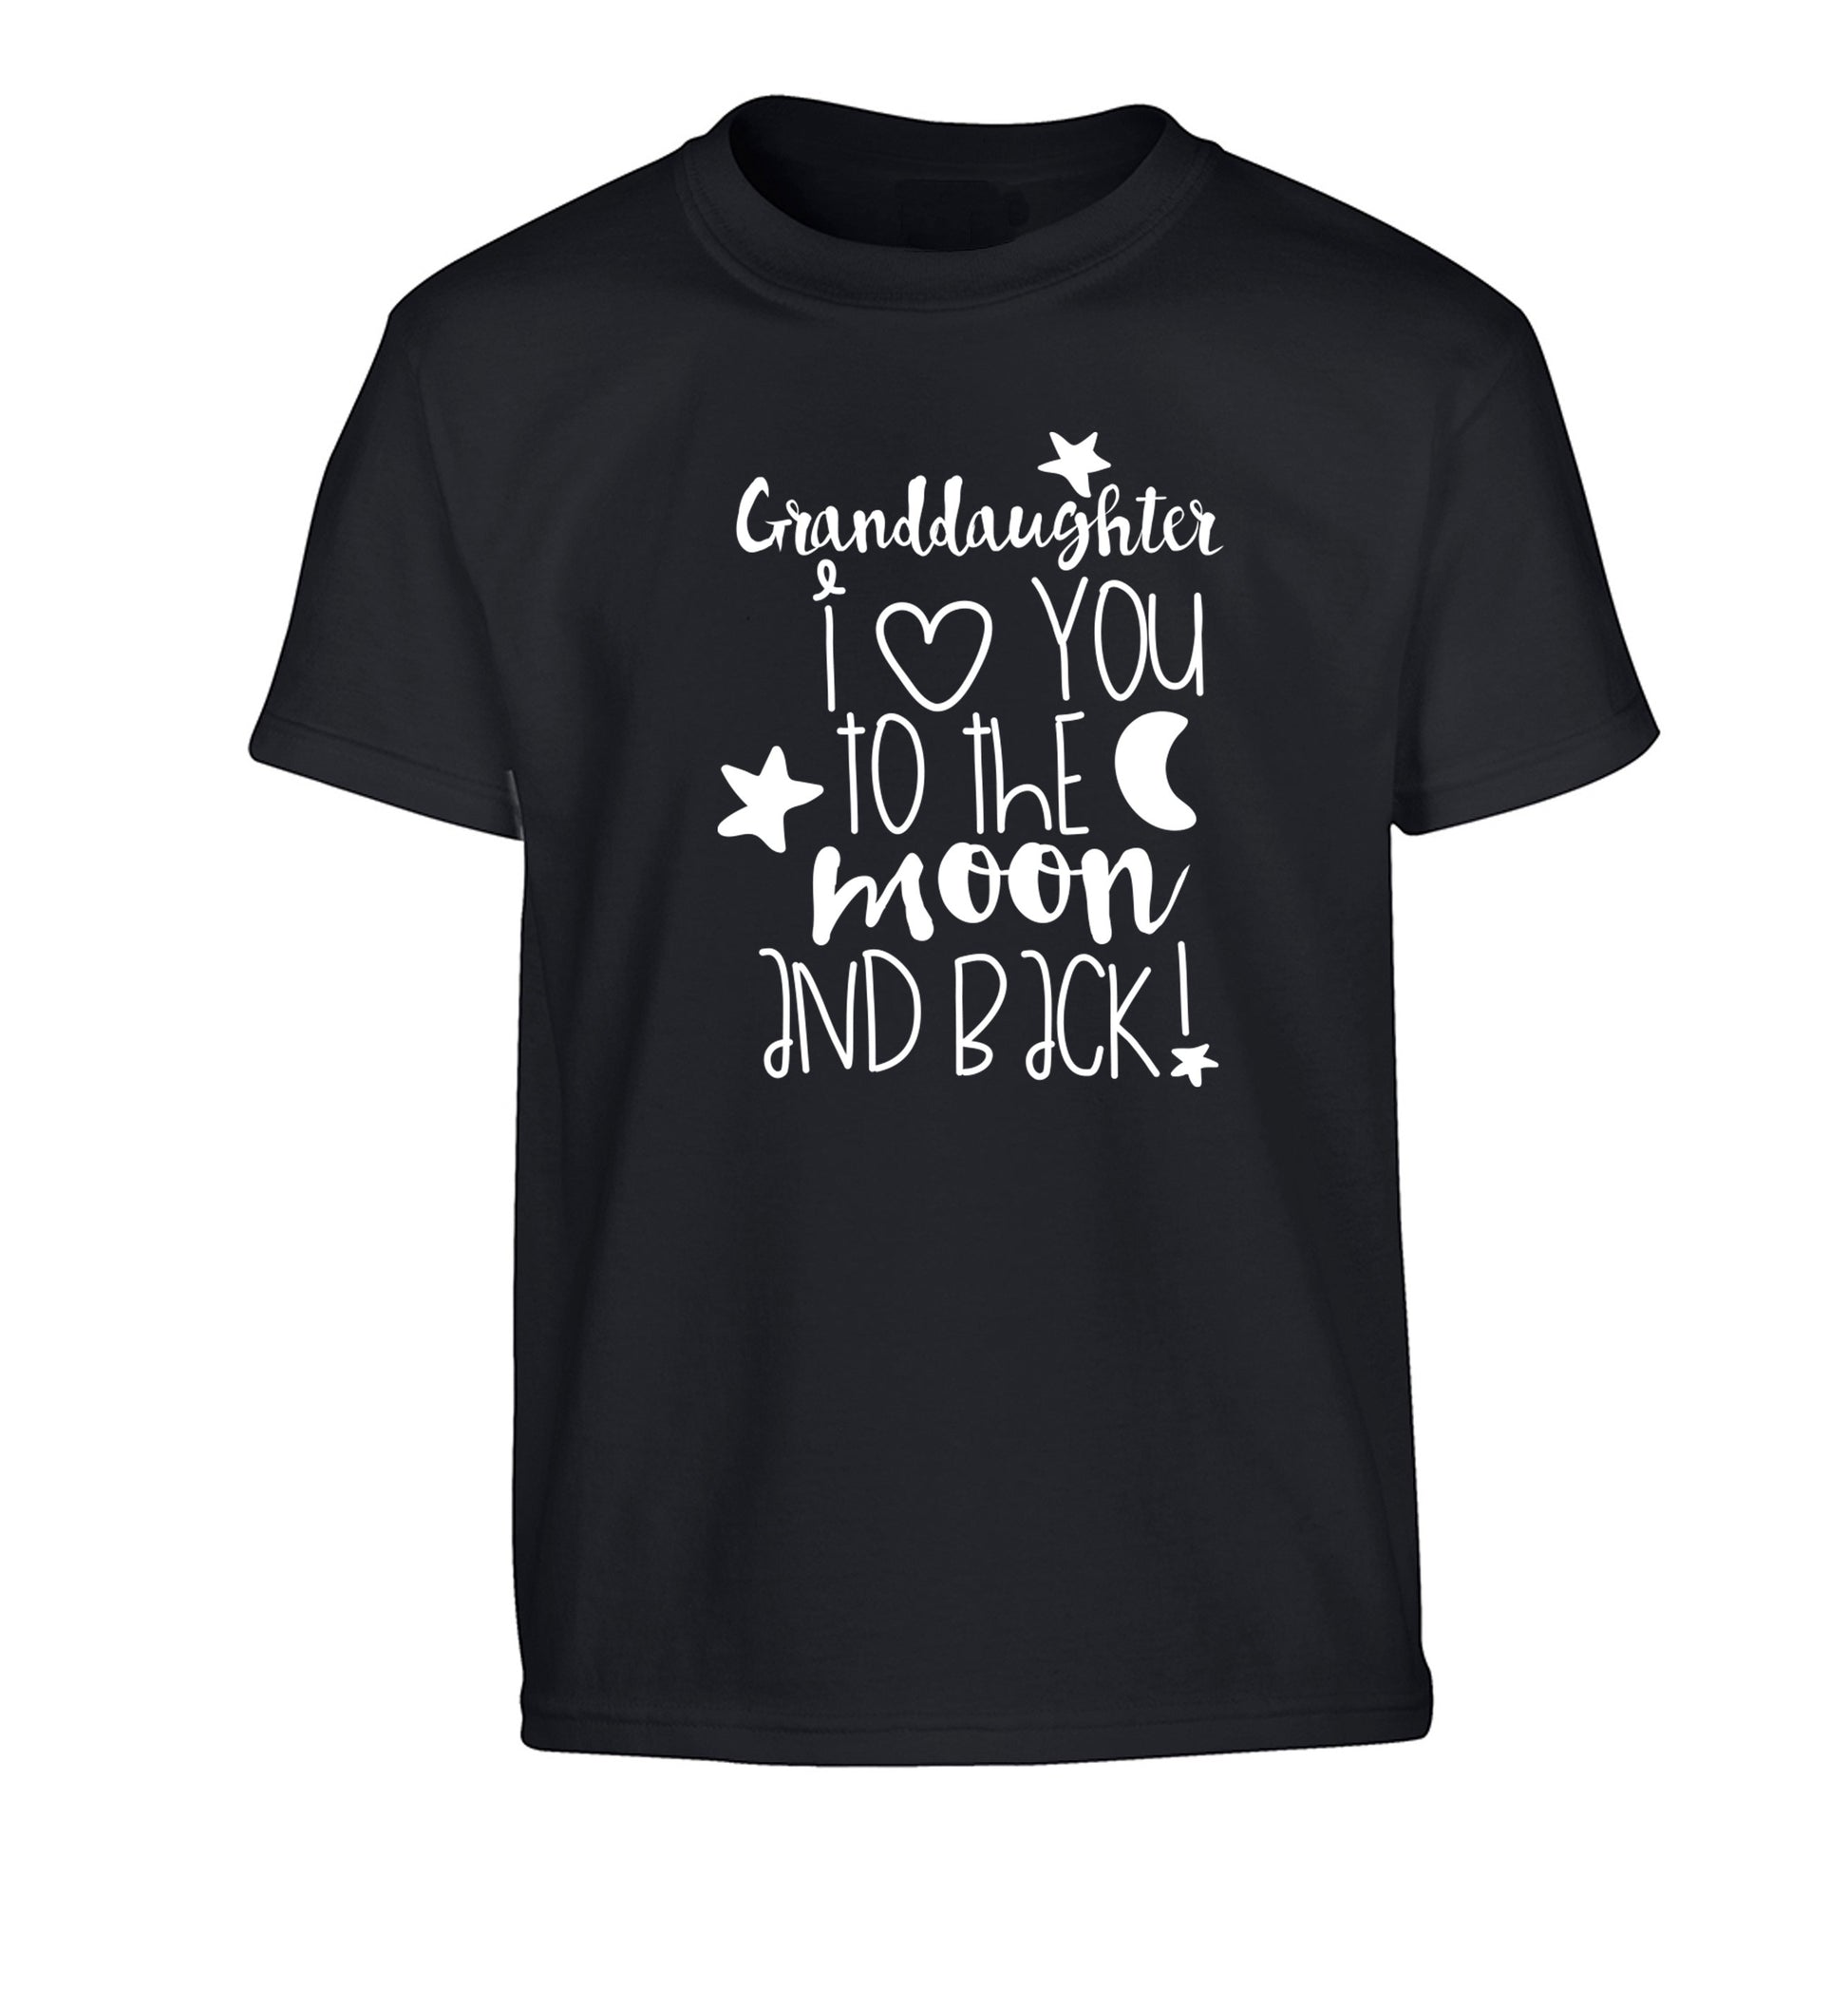 Granddaughter I love you to the moon and back Children's black Tshirt 12-14 Years